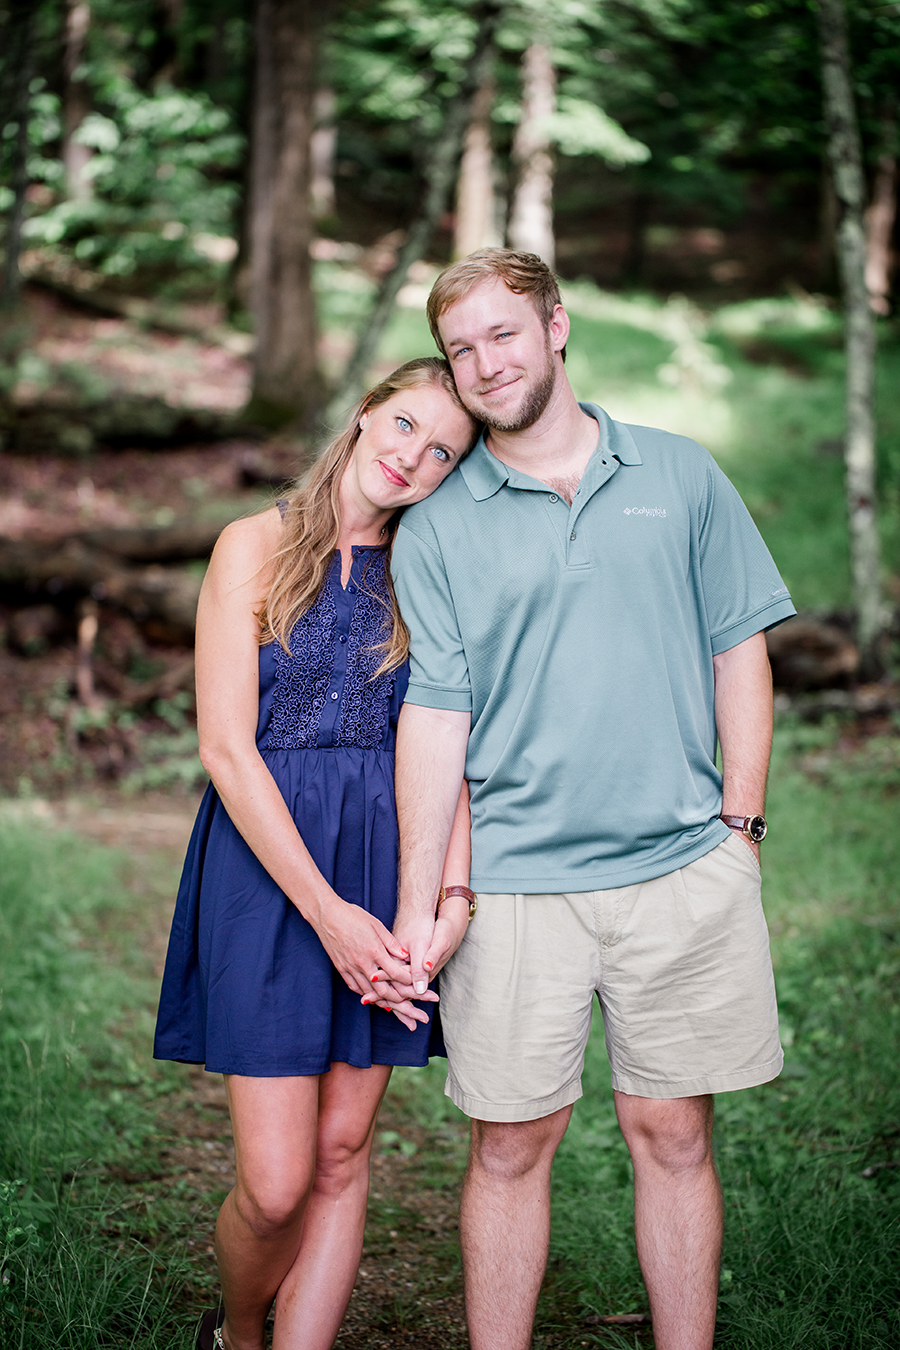 Their heads leaning into each other engagement photo by Knoxville Wedding Photographer, Amanda May Photos.